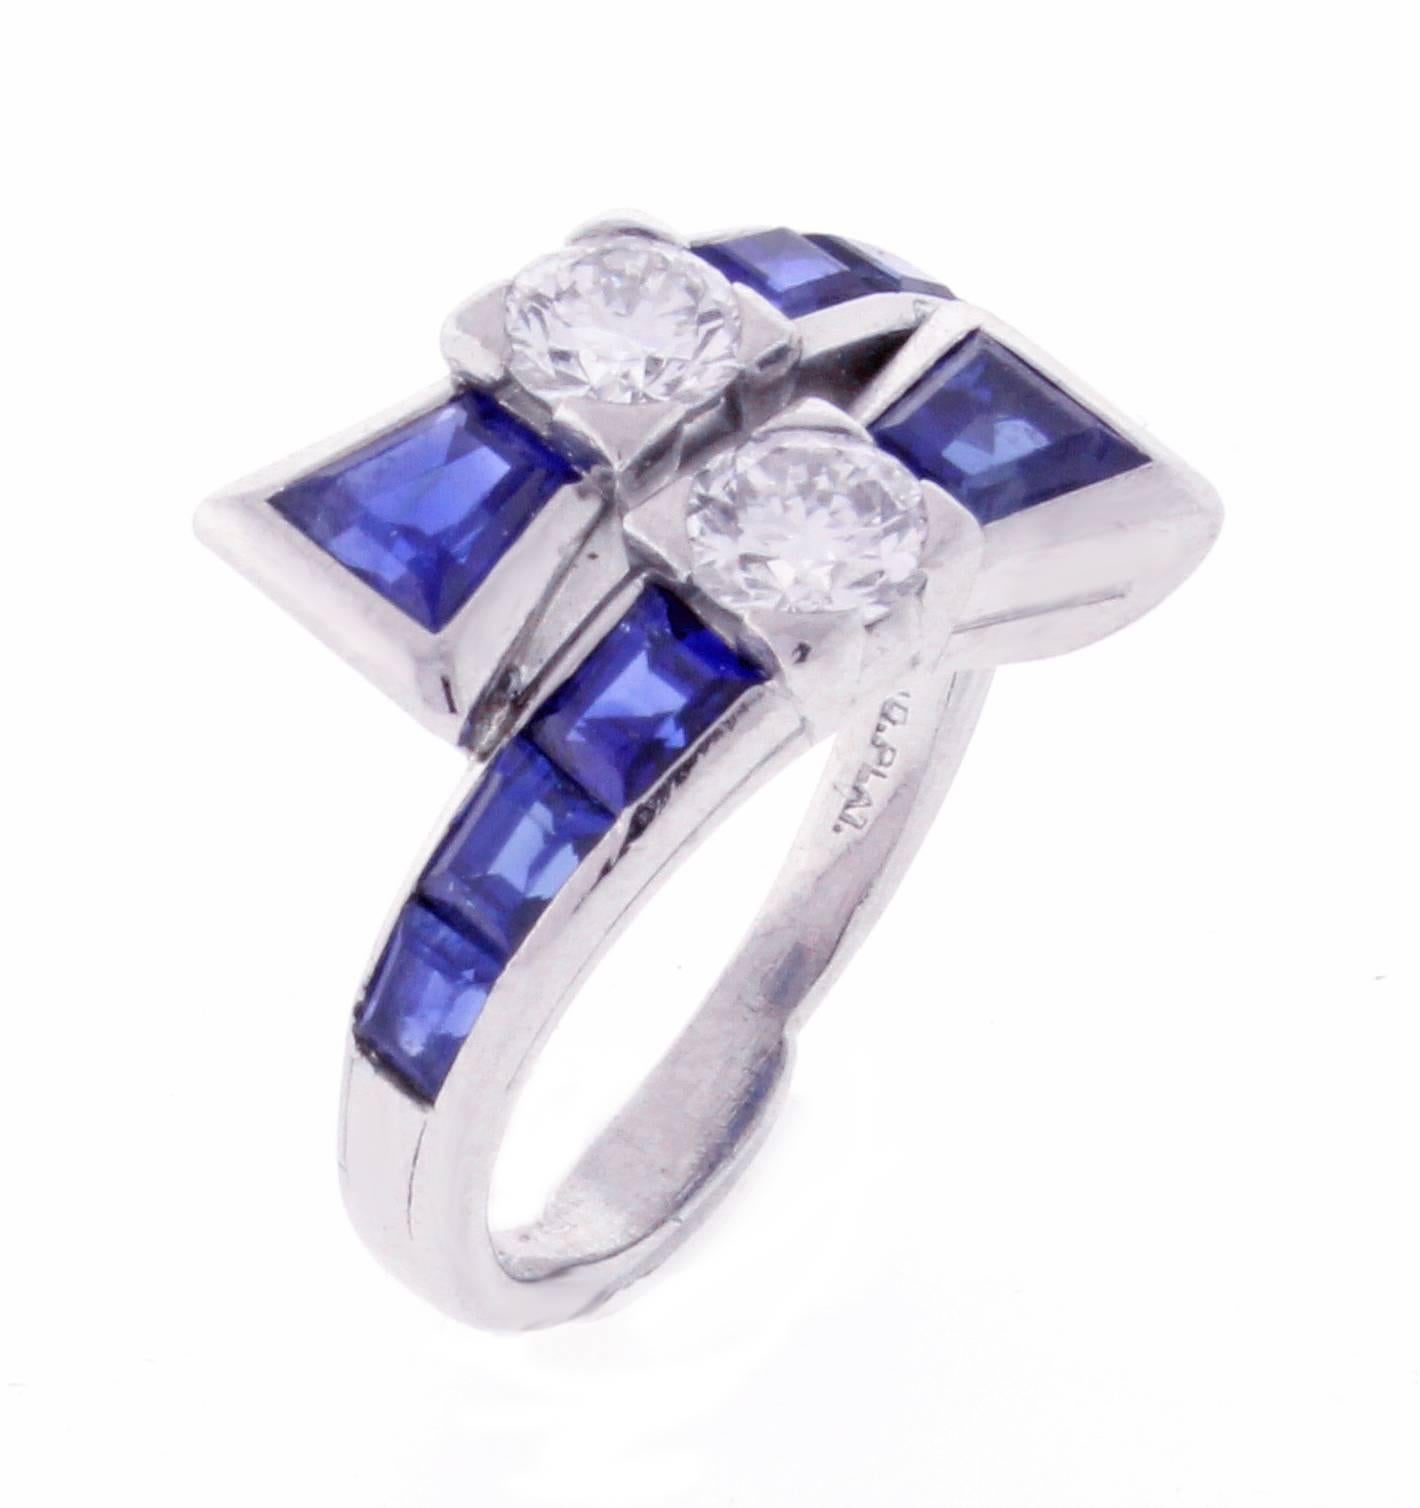 From Tiffany & Co, an unusual twin diamond and sapphire ring. The two round diamonds weigh approximately .60 carats with 8 fancy cut sapphires weighing 1.50 carats. Set in platinum,  